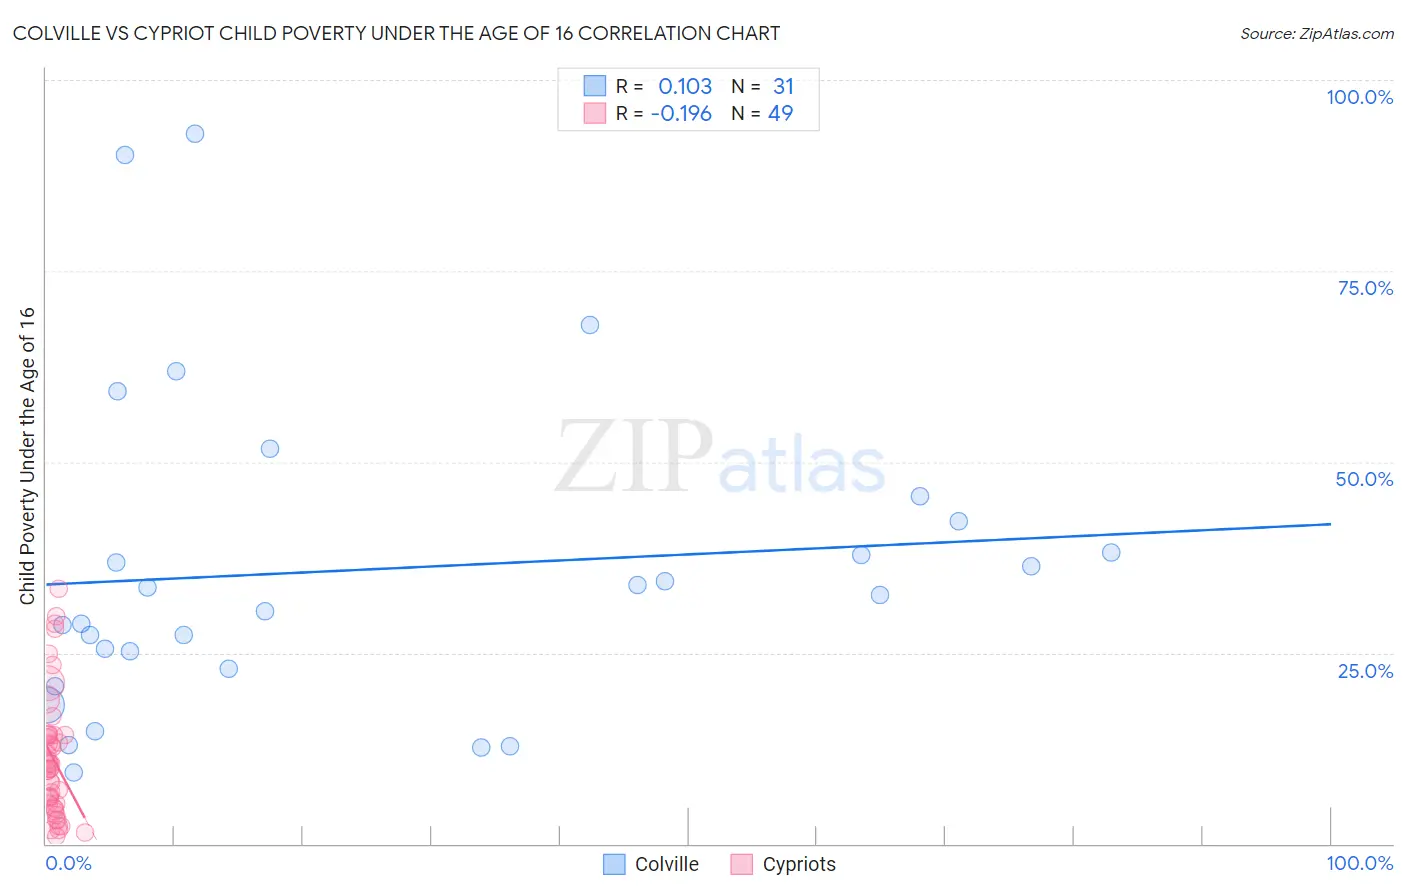 Colville vs Cypriot Child Poverty Under the Age of 16